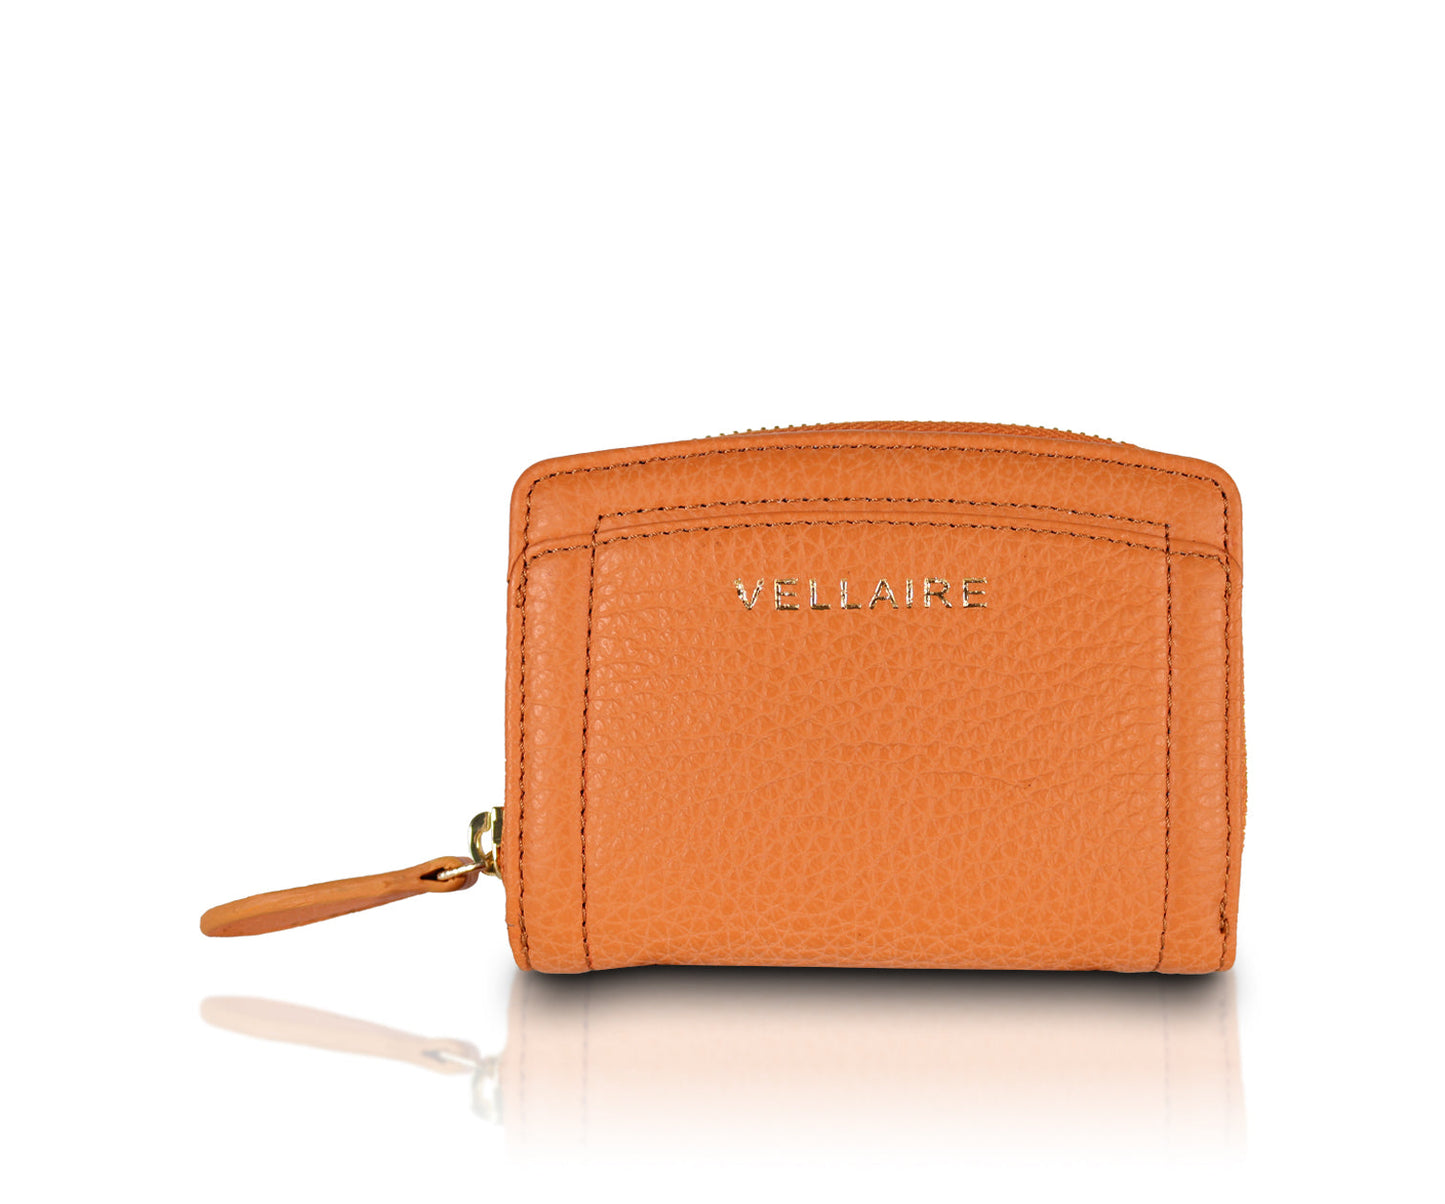 Load image into Gallery viewer, Buckingham Leather Card Holder | Orange
